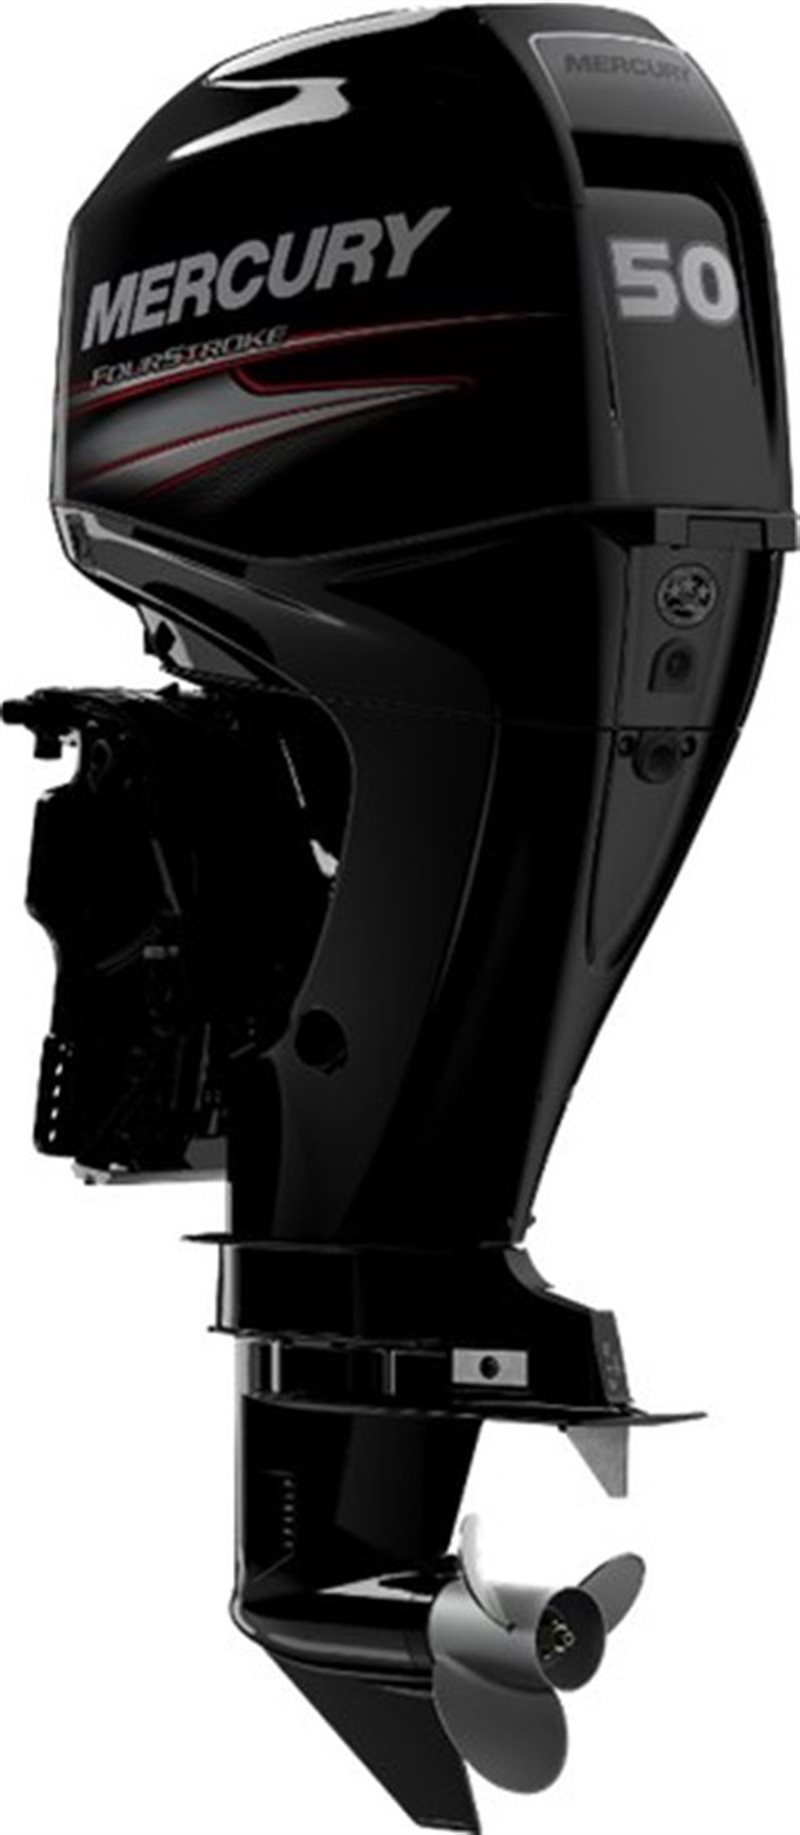 2020 Mercury Outboard FourStroke 40-60 hp 50 hp EFI at Fort Fremont Marine